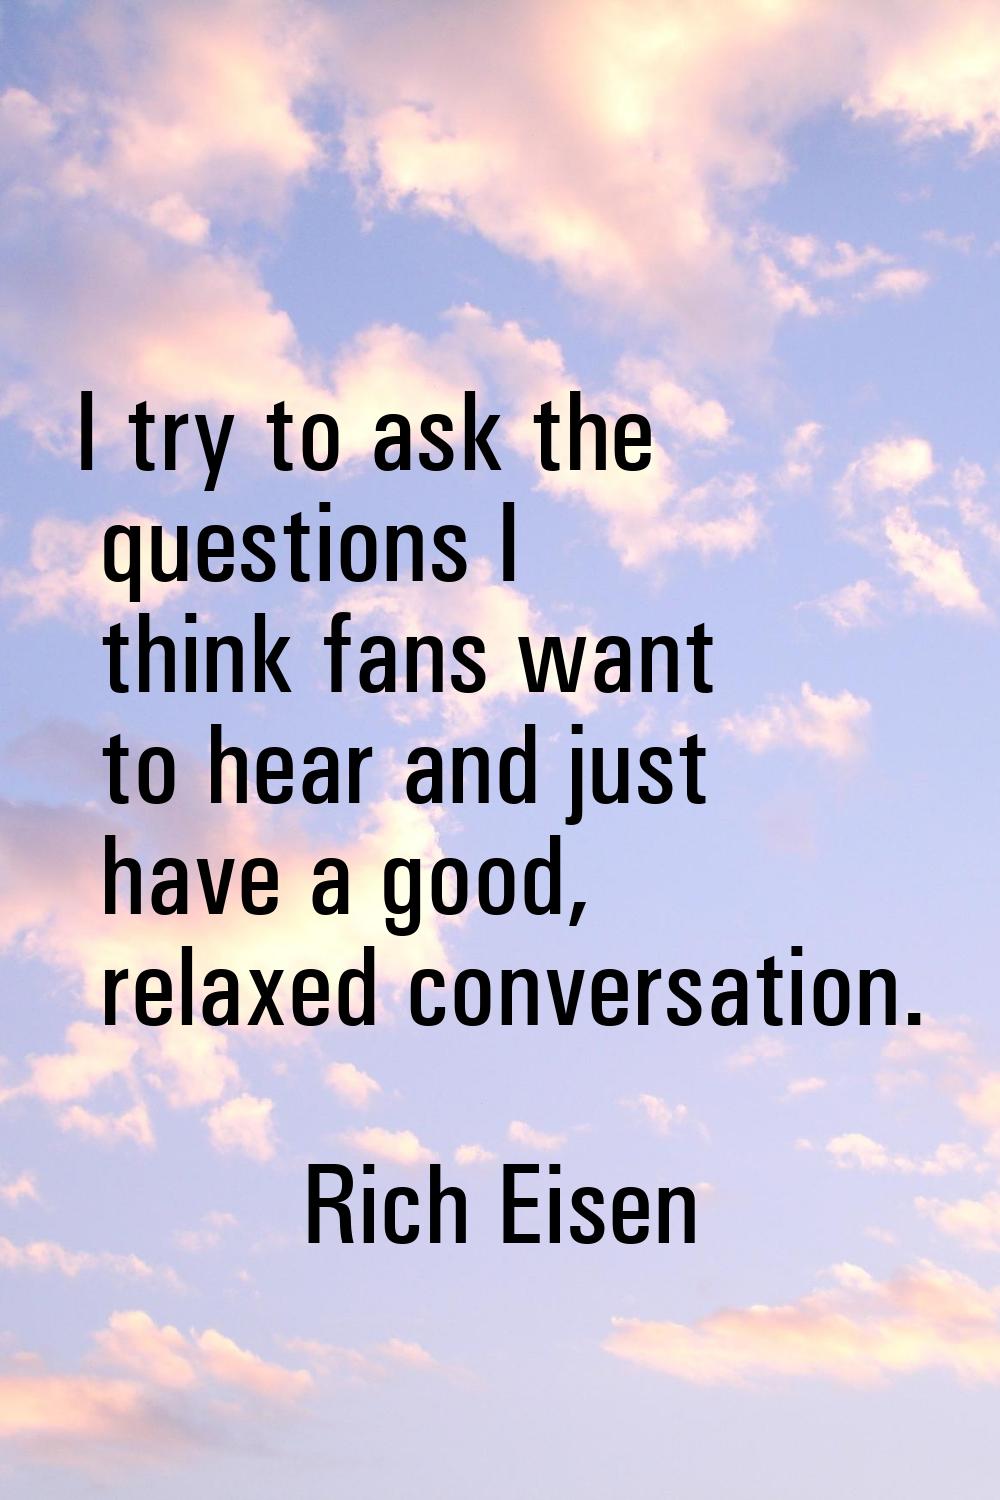 I try to ask the questions I think fans want to hear and just have a good, relaxed conversation.